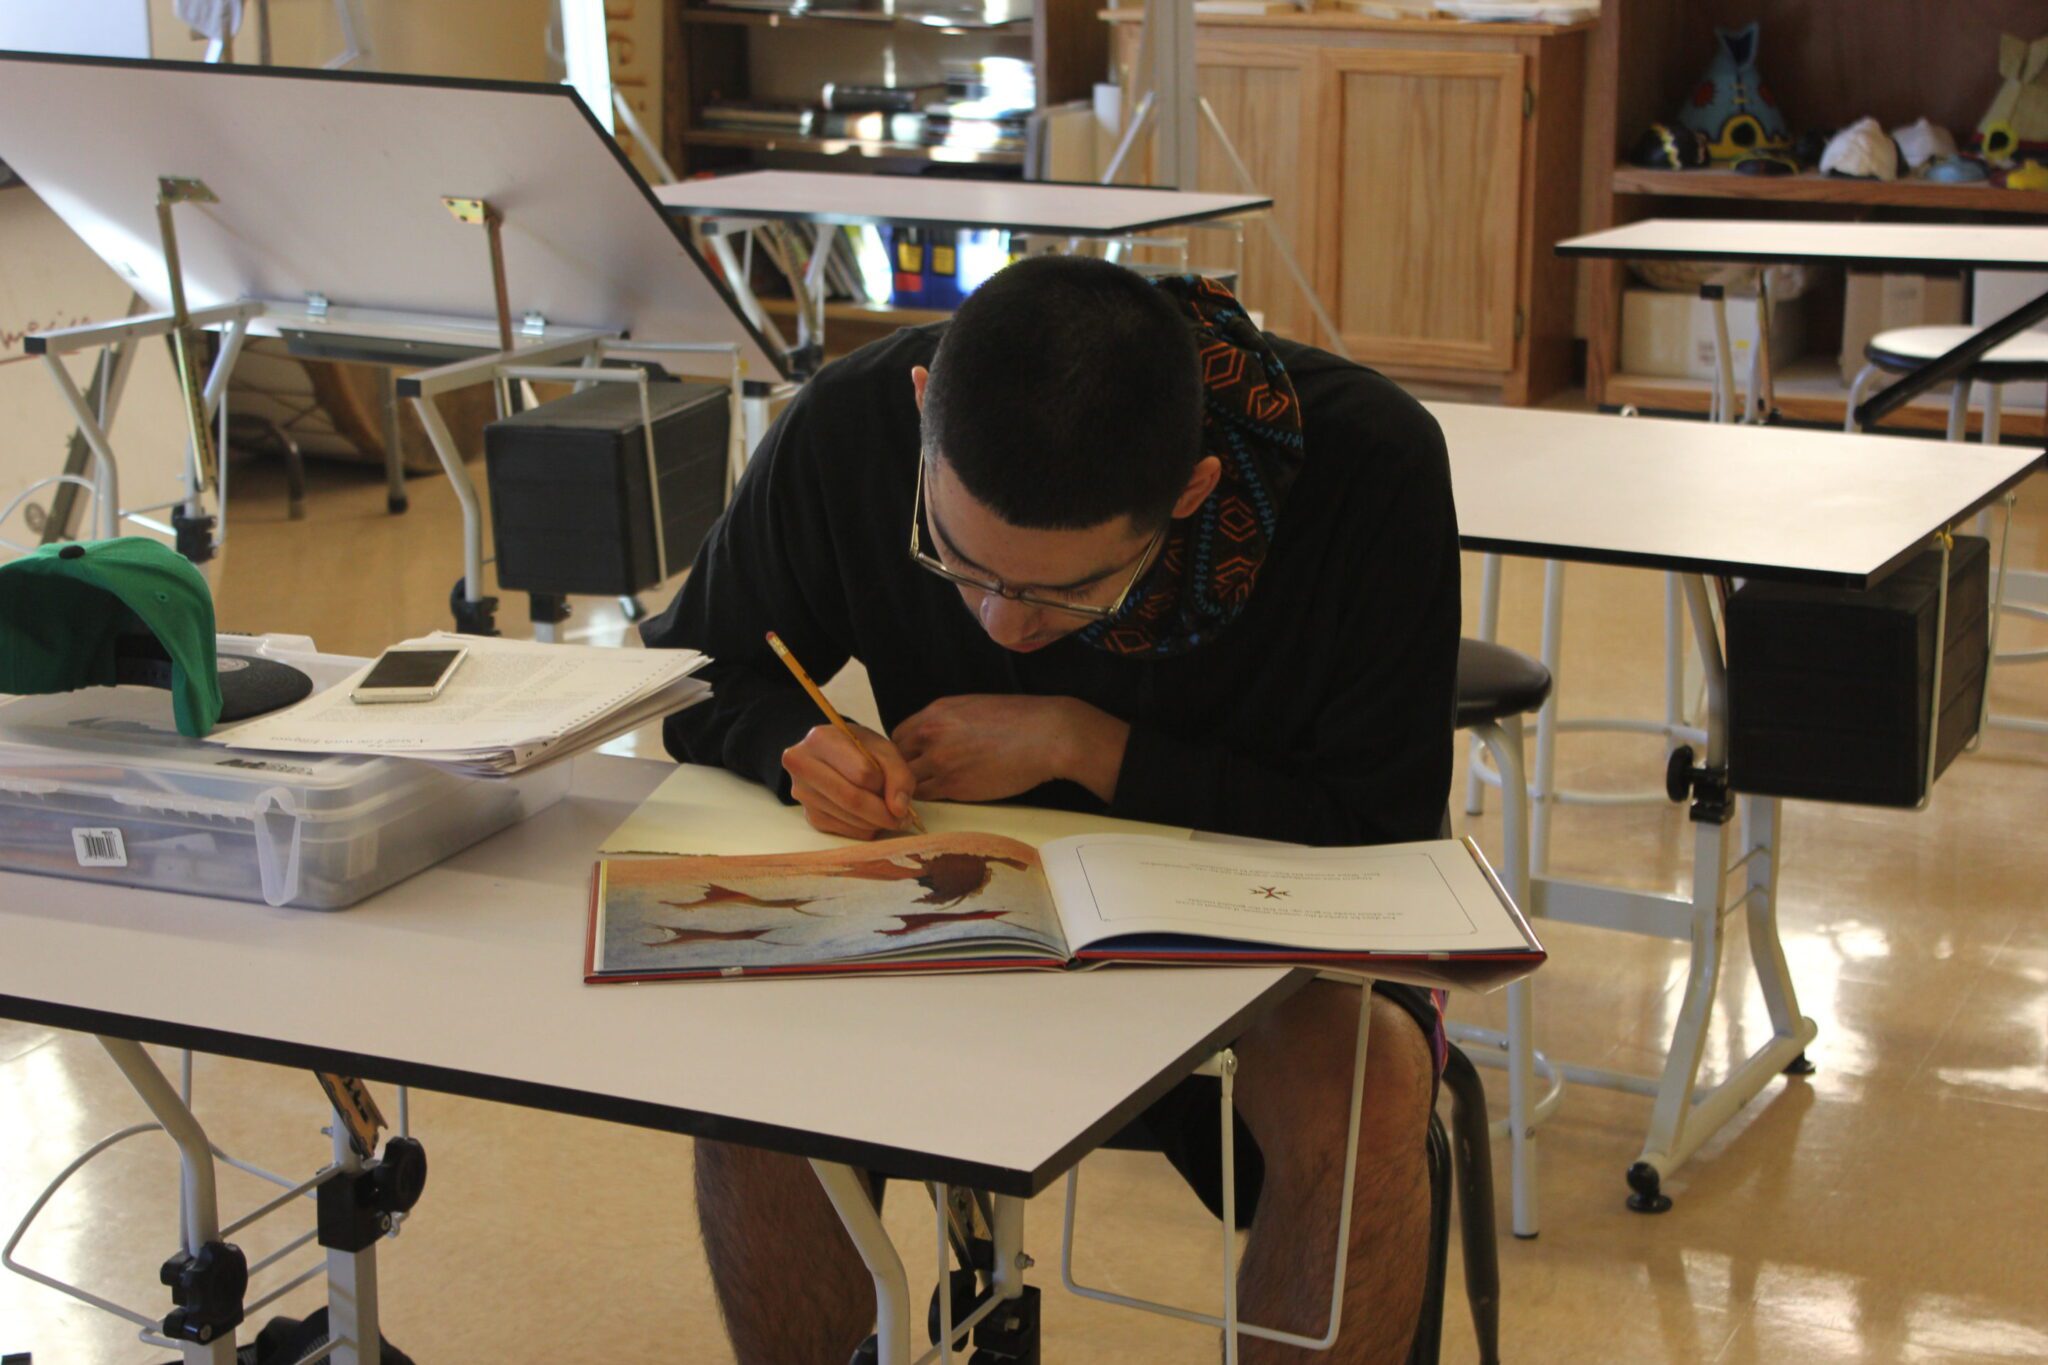 A student taking notes while reading his textbook.